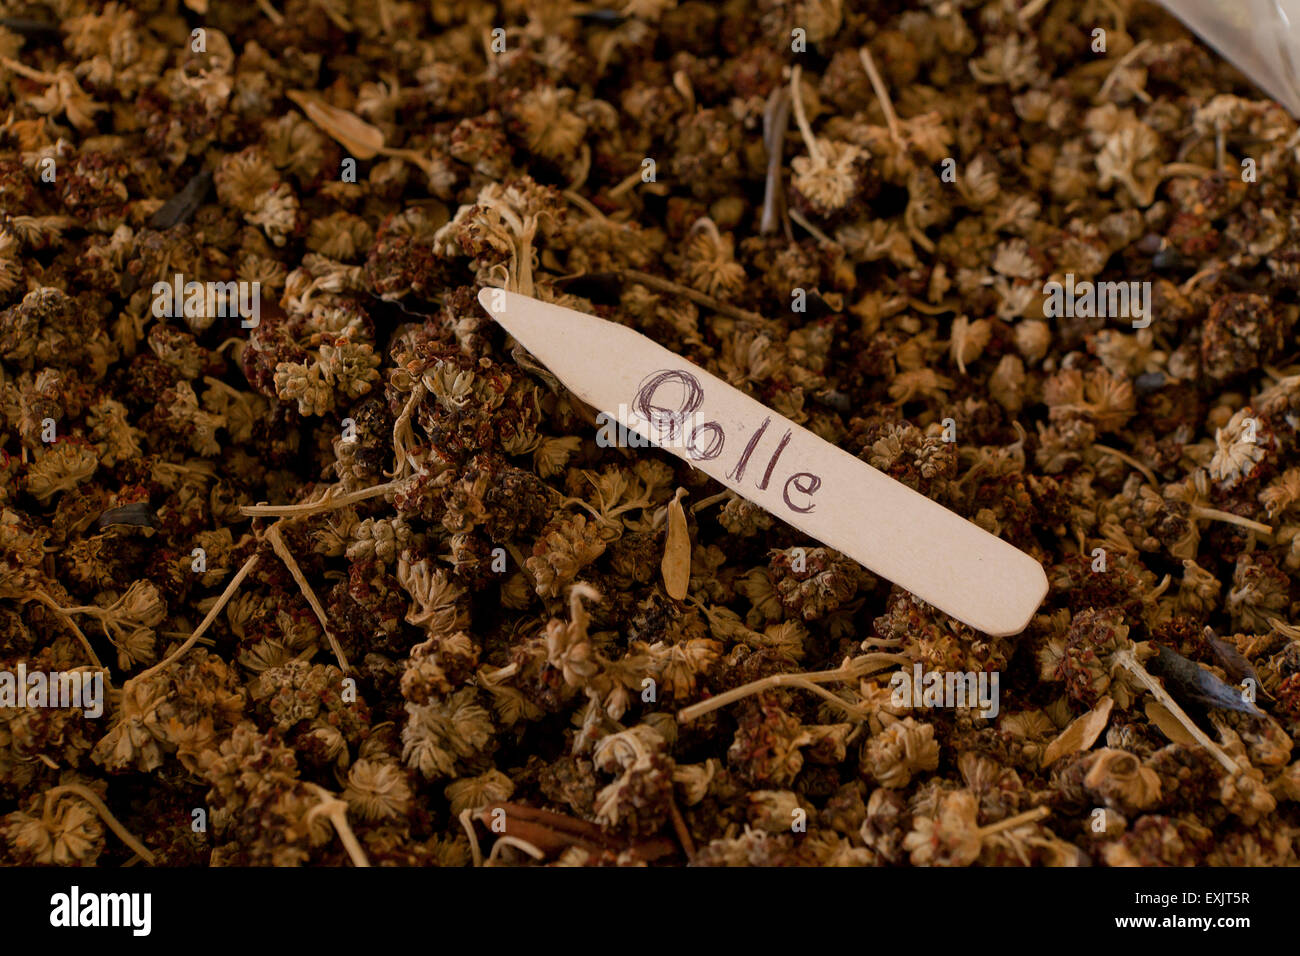 Qolle, Peruvian plant used in natural dyeing process of yarn Stock Photo